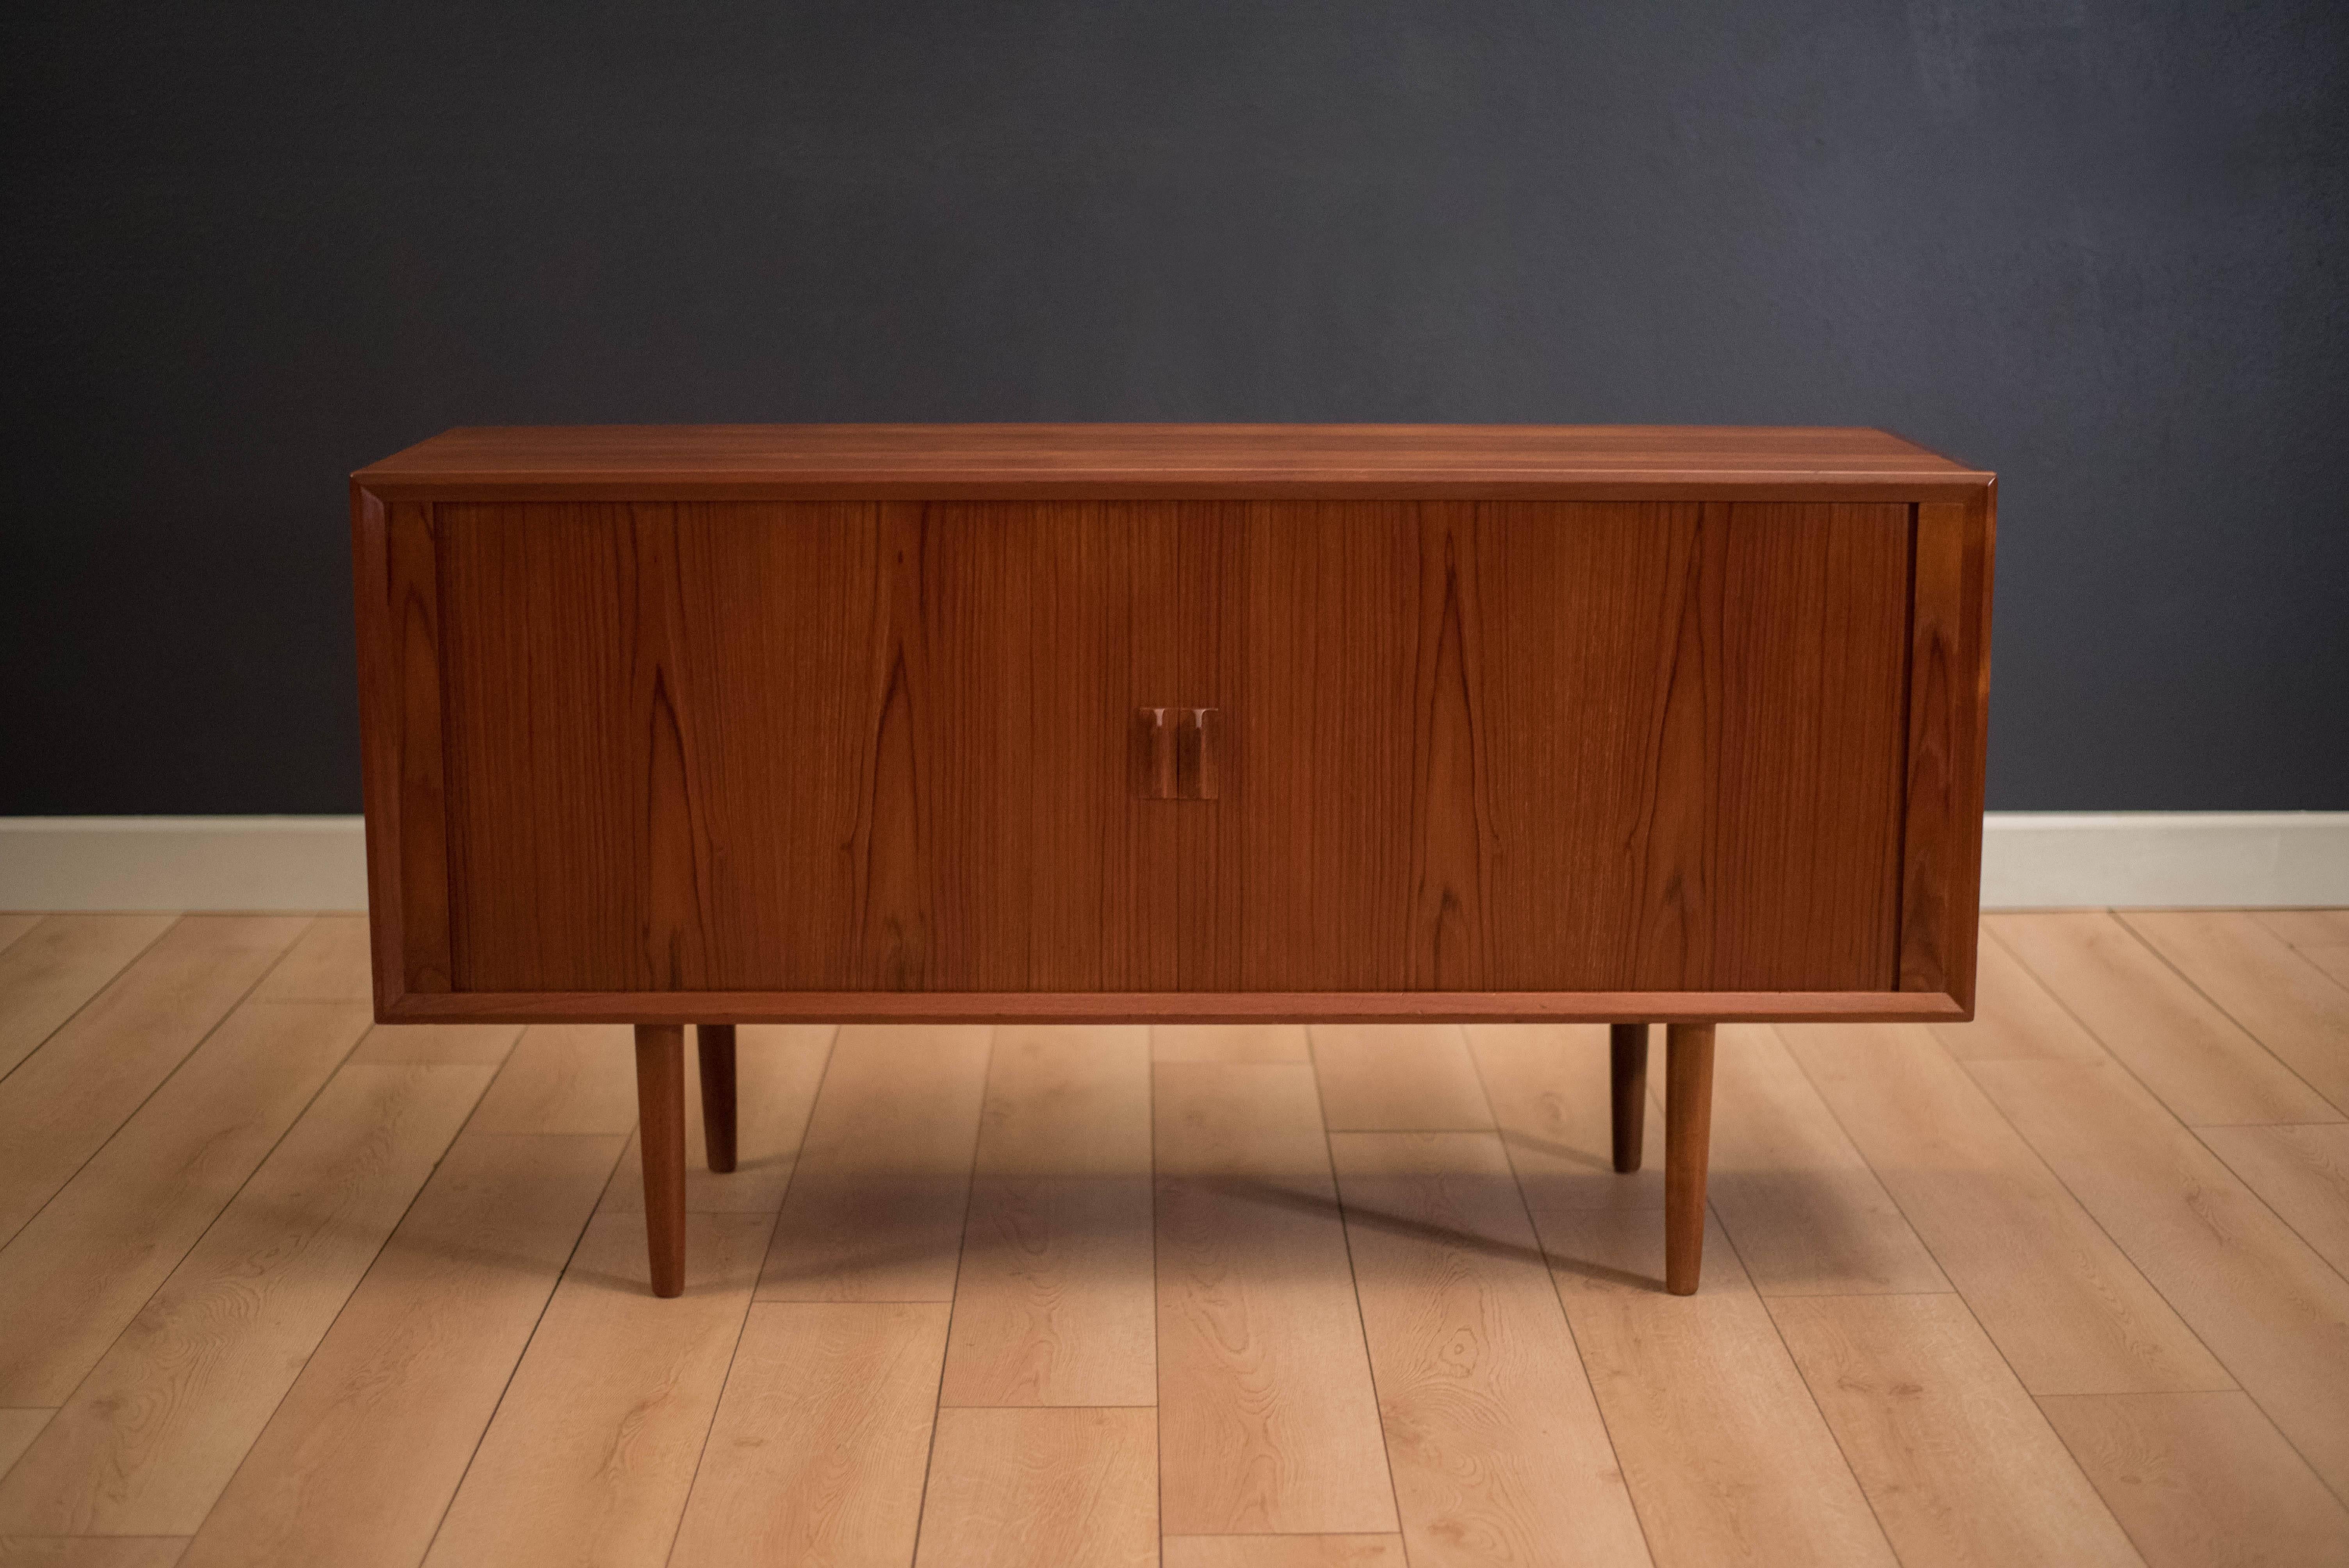 Vintage Danish credenza or entertainment console designed by Svend A. Larsen for Faarup Mobelfabrik. This piece features sliding tambour doors with sculpted teak handles. Includes one drawer, adjustable shelving, and dividers. Pull-out shelf